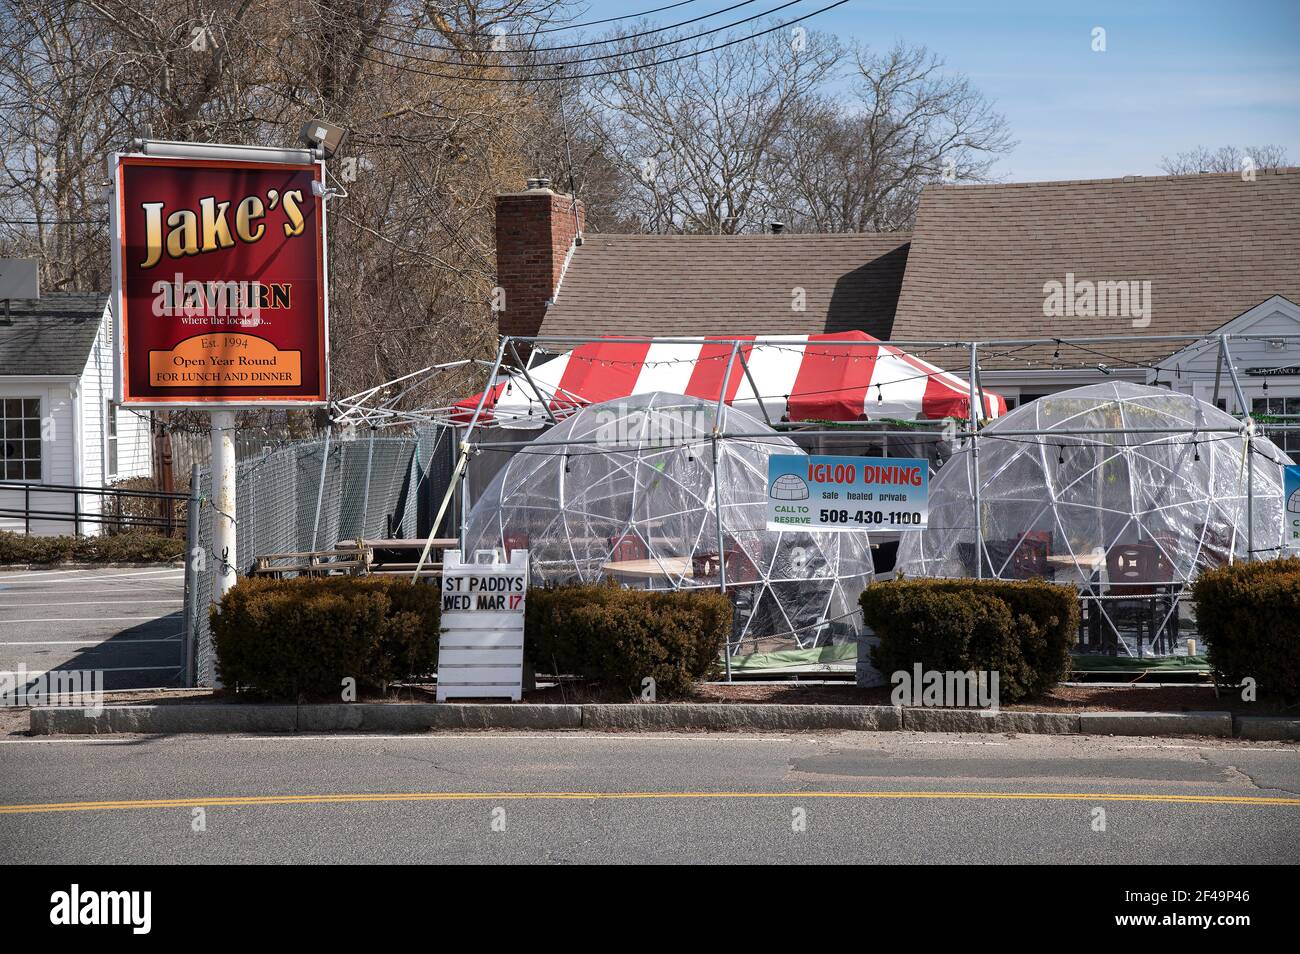 Outdoor dining during the Covid Pandemic on Cape Cod.  Dining igloos in a restaurant parking lot Stock Photo